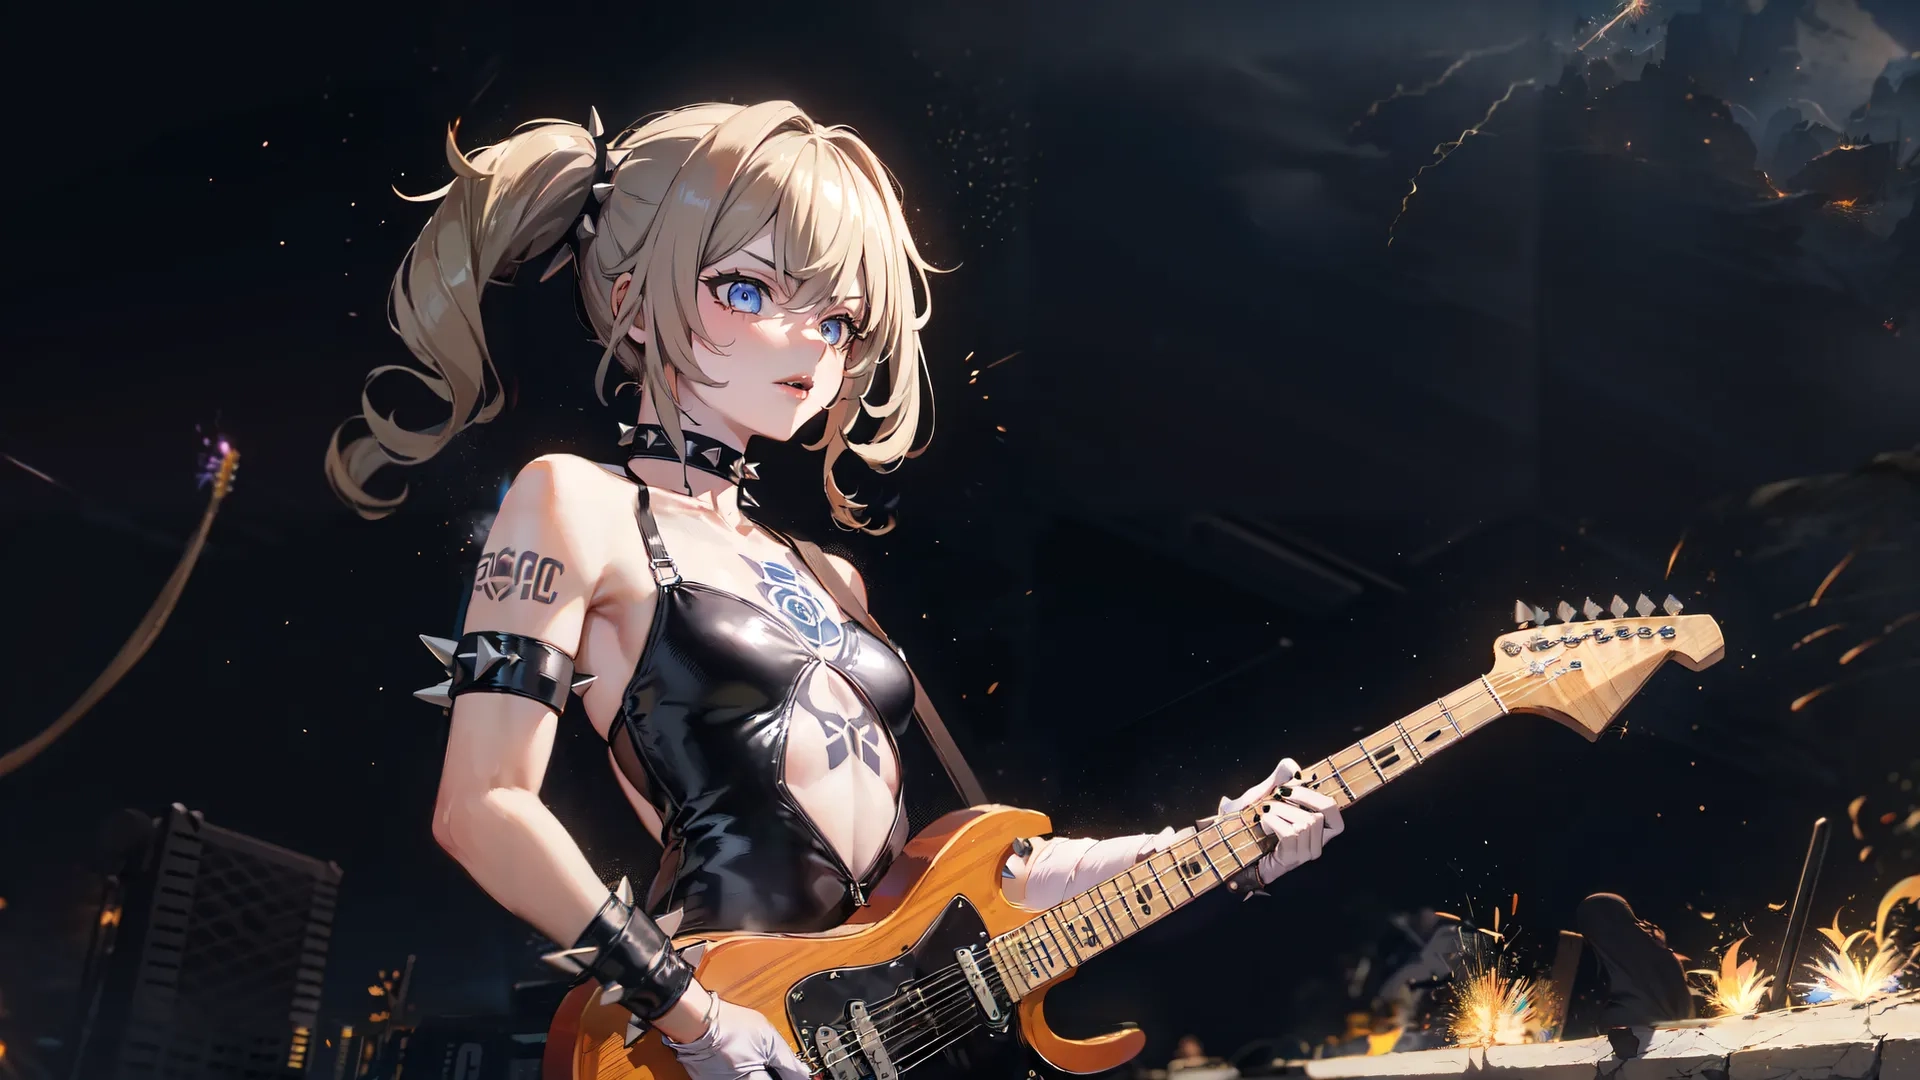 a woman with blonde hair and long ear cuts plays an electric guitar on a city street at night alone, and lots of flames are sprinched about
